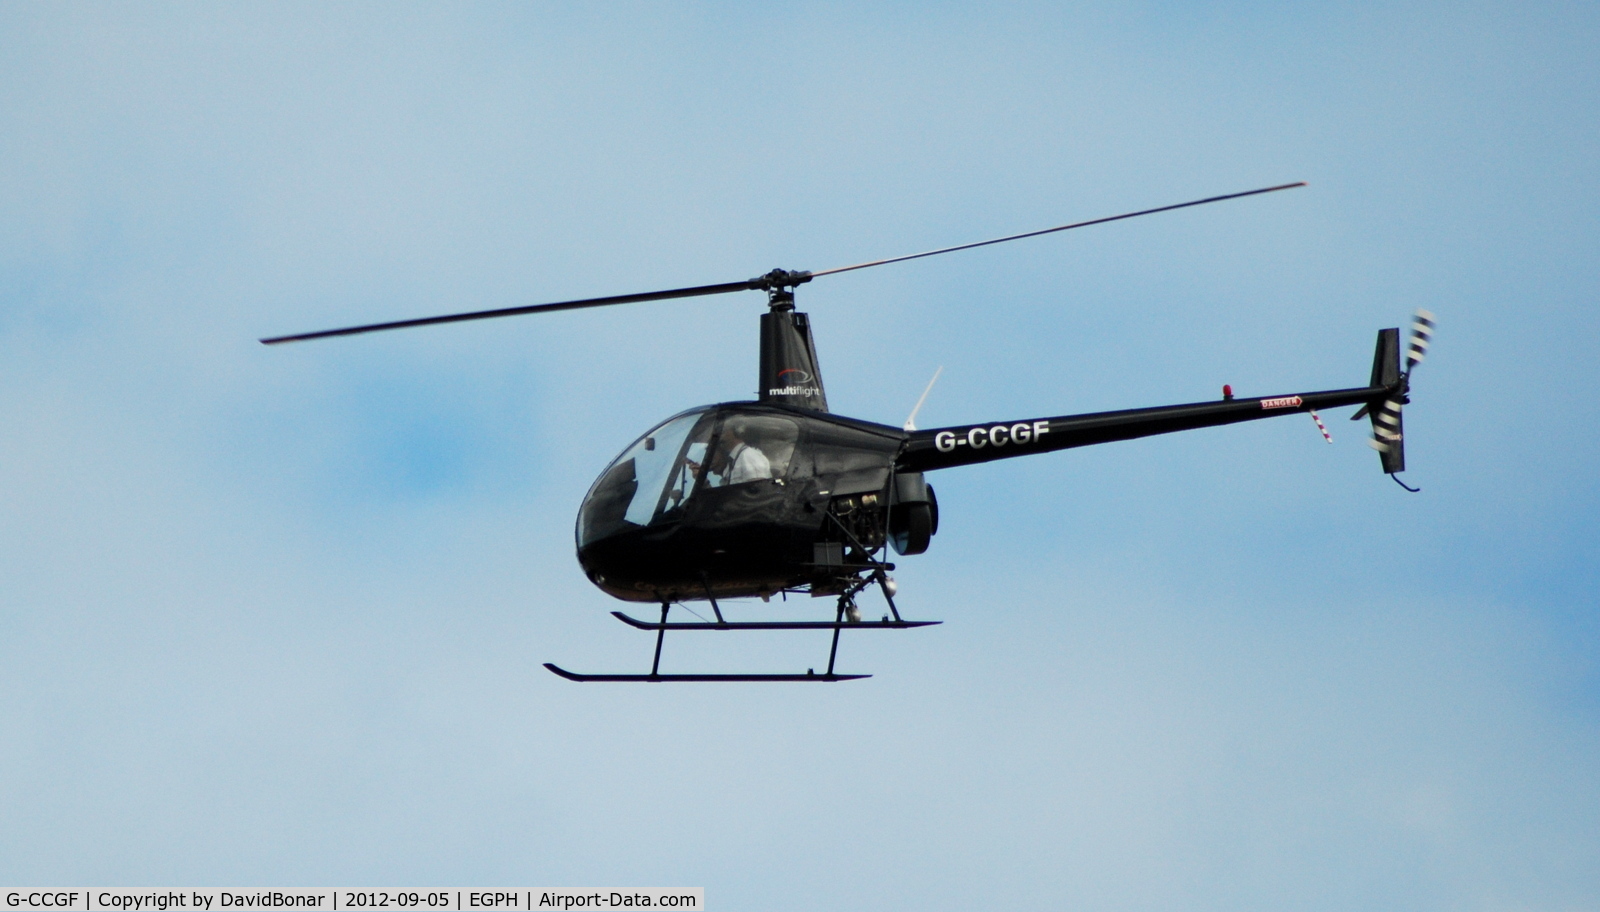 G-CCGF, 2003 Robinson R22 Beta C/N 3454, An unusual but welcome visitor